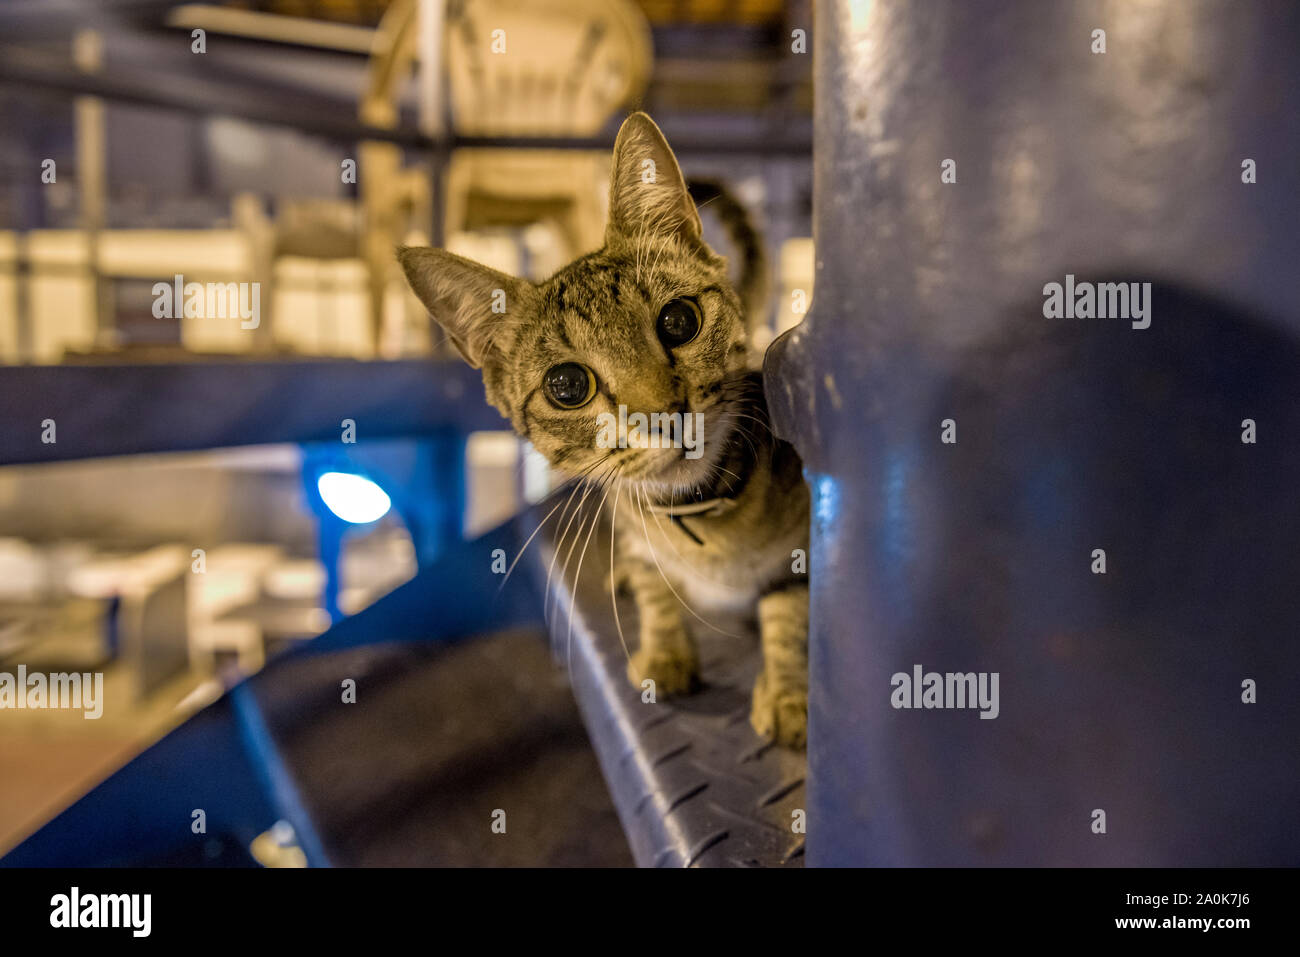 Cute baby cat in steel stair looking curious Stock Photo